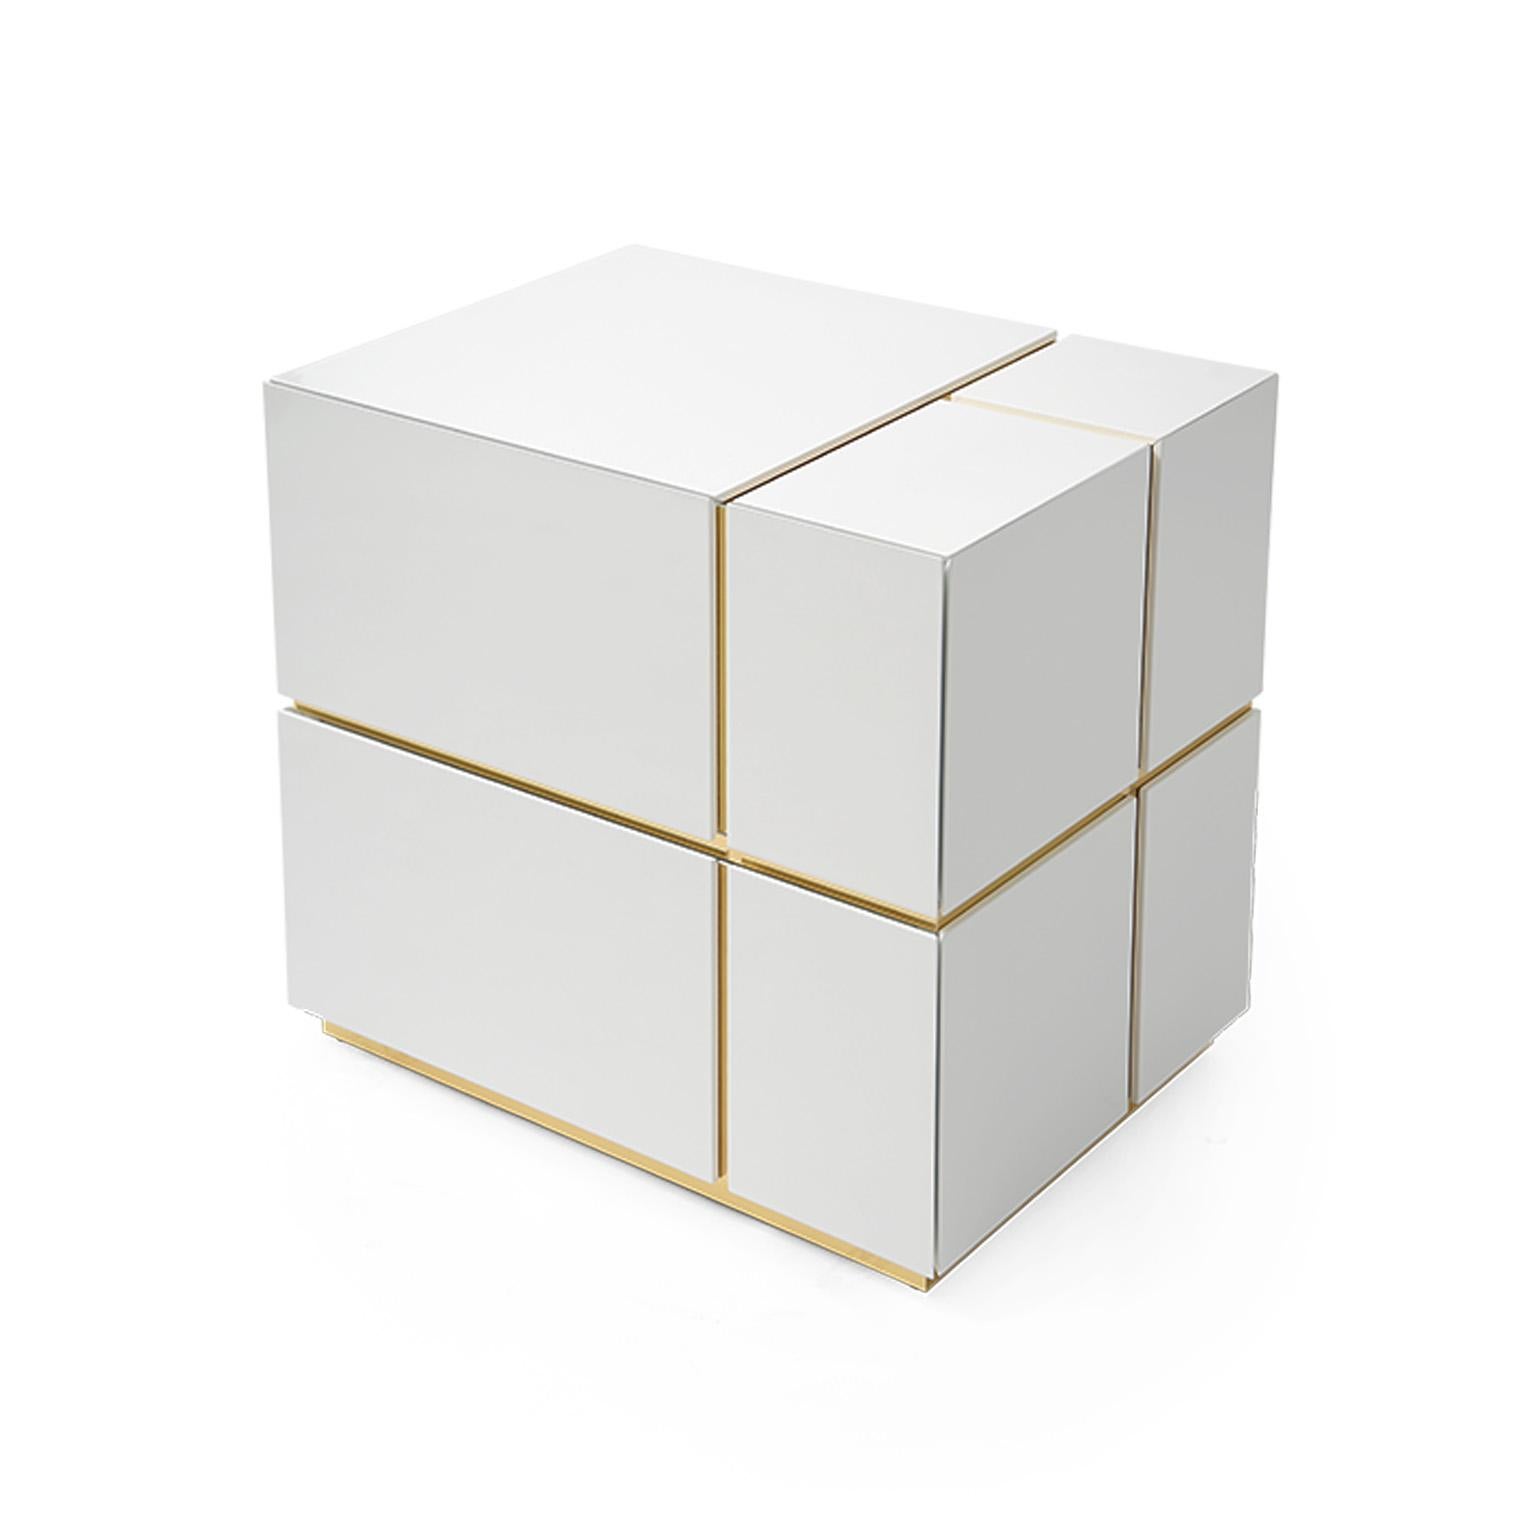 This modern bedside table diamond gently fits the bedroom atmosphere by contrasting white and brass. The handcrafted construction has a high gloss white finish and brass details. Made of wood, plywood and brass, the bedside table diamond features